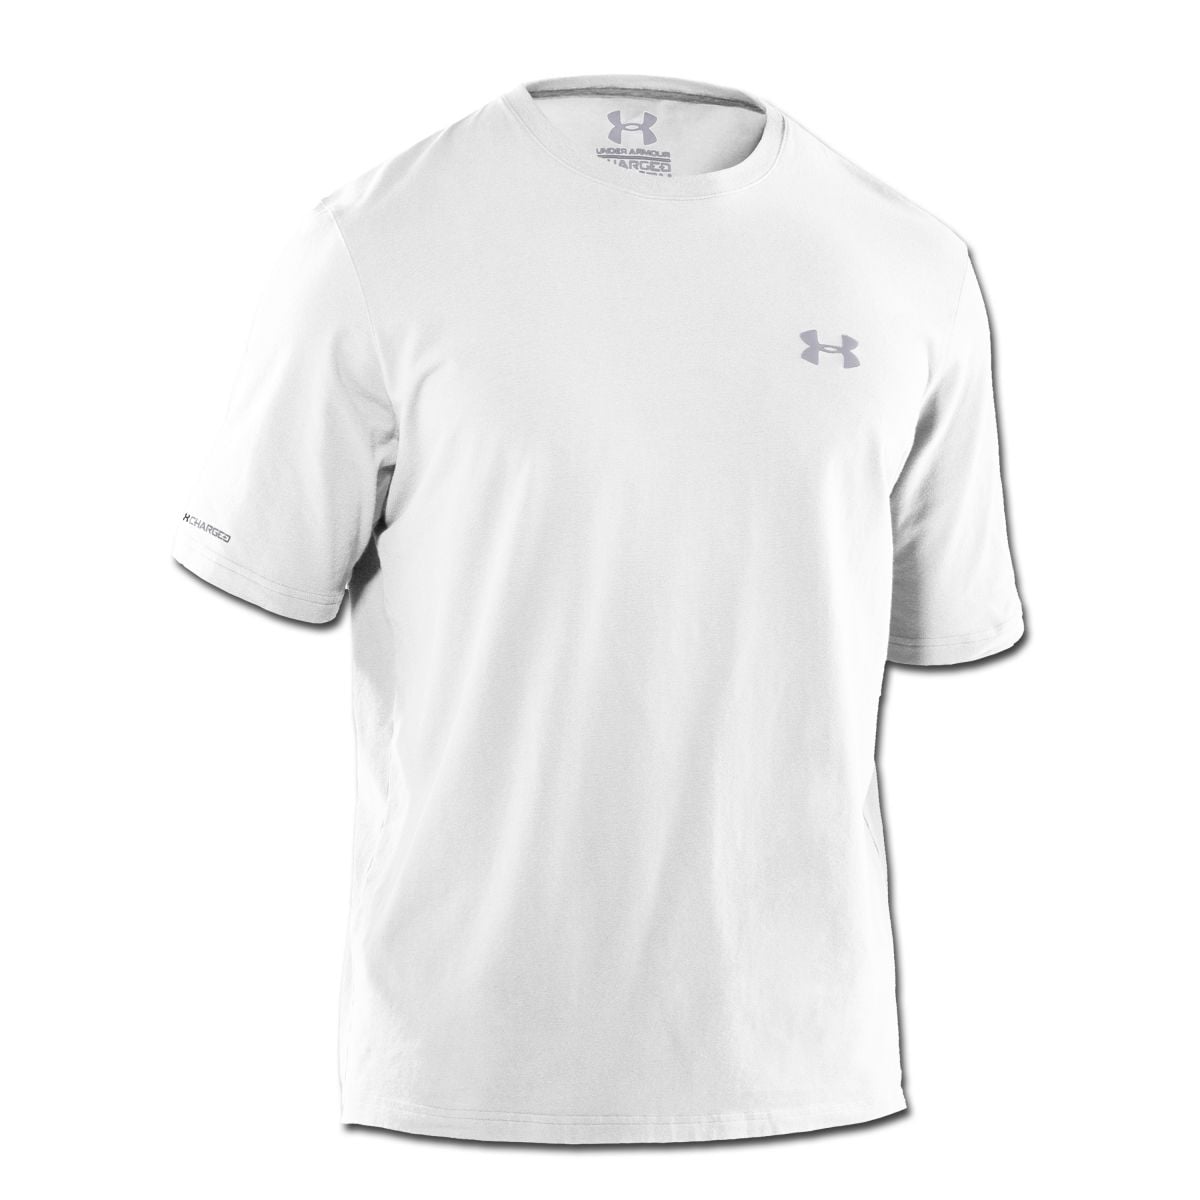 Under Armour T-Shirt Charged Cotton white | Under Armour T-Shirt ...